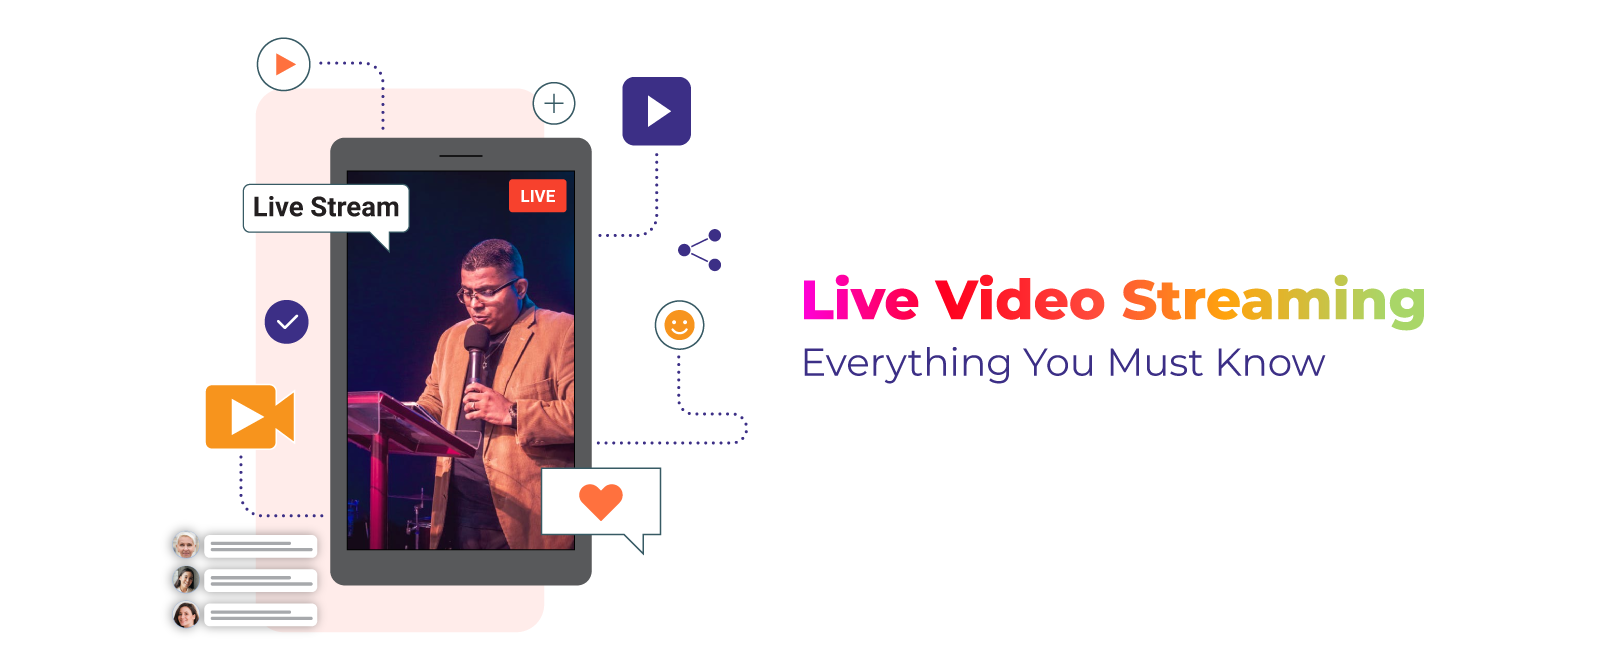 Live Video Streaming – Everything You Must Know